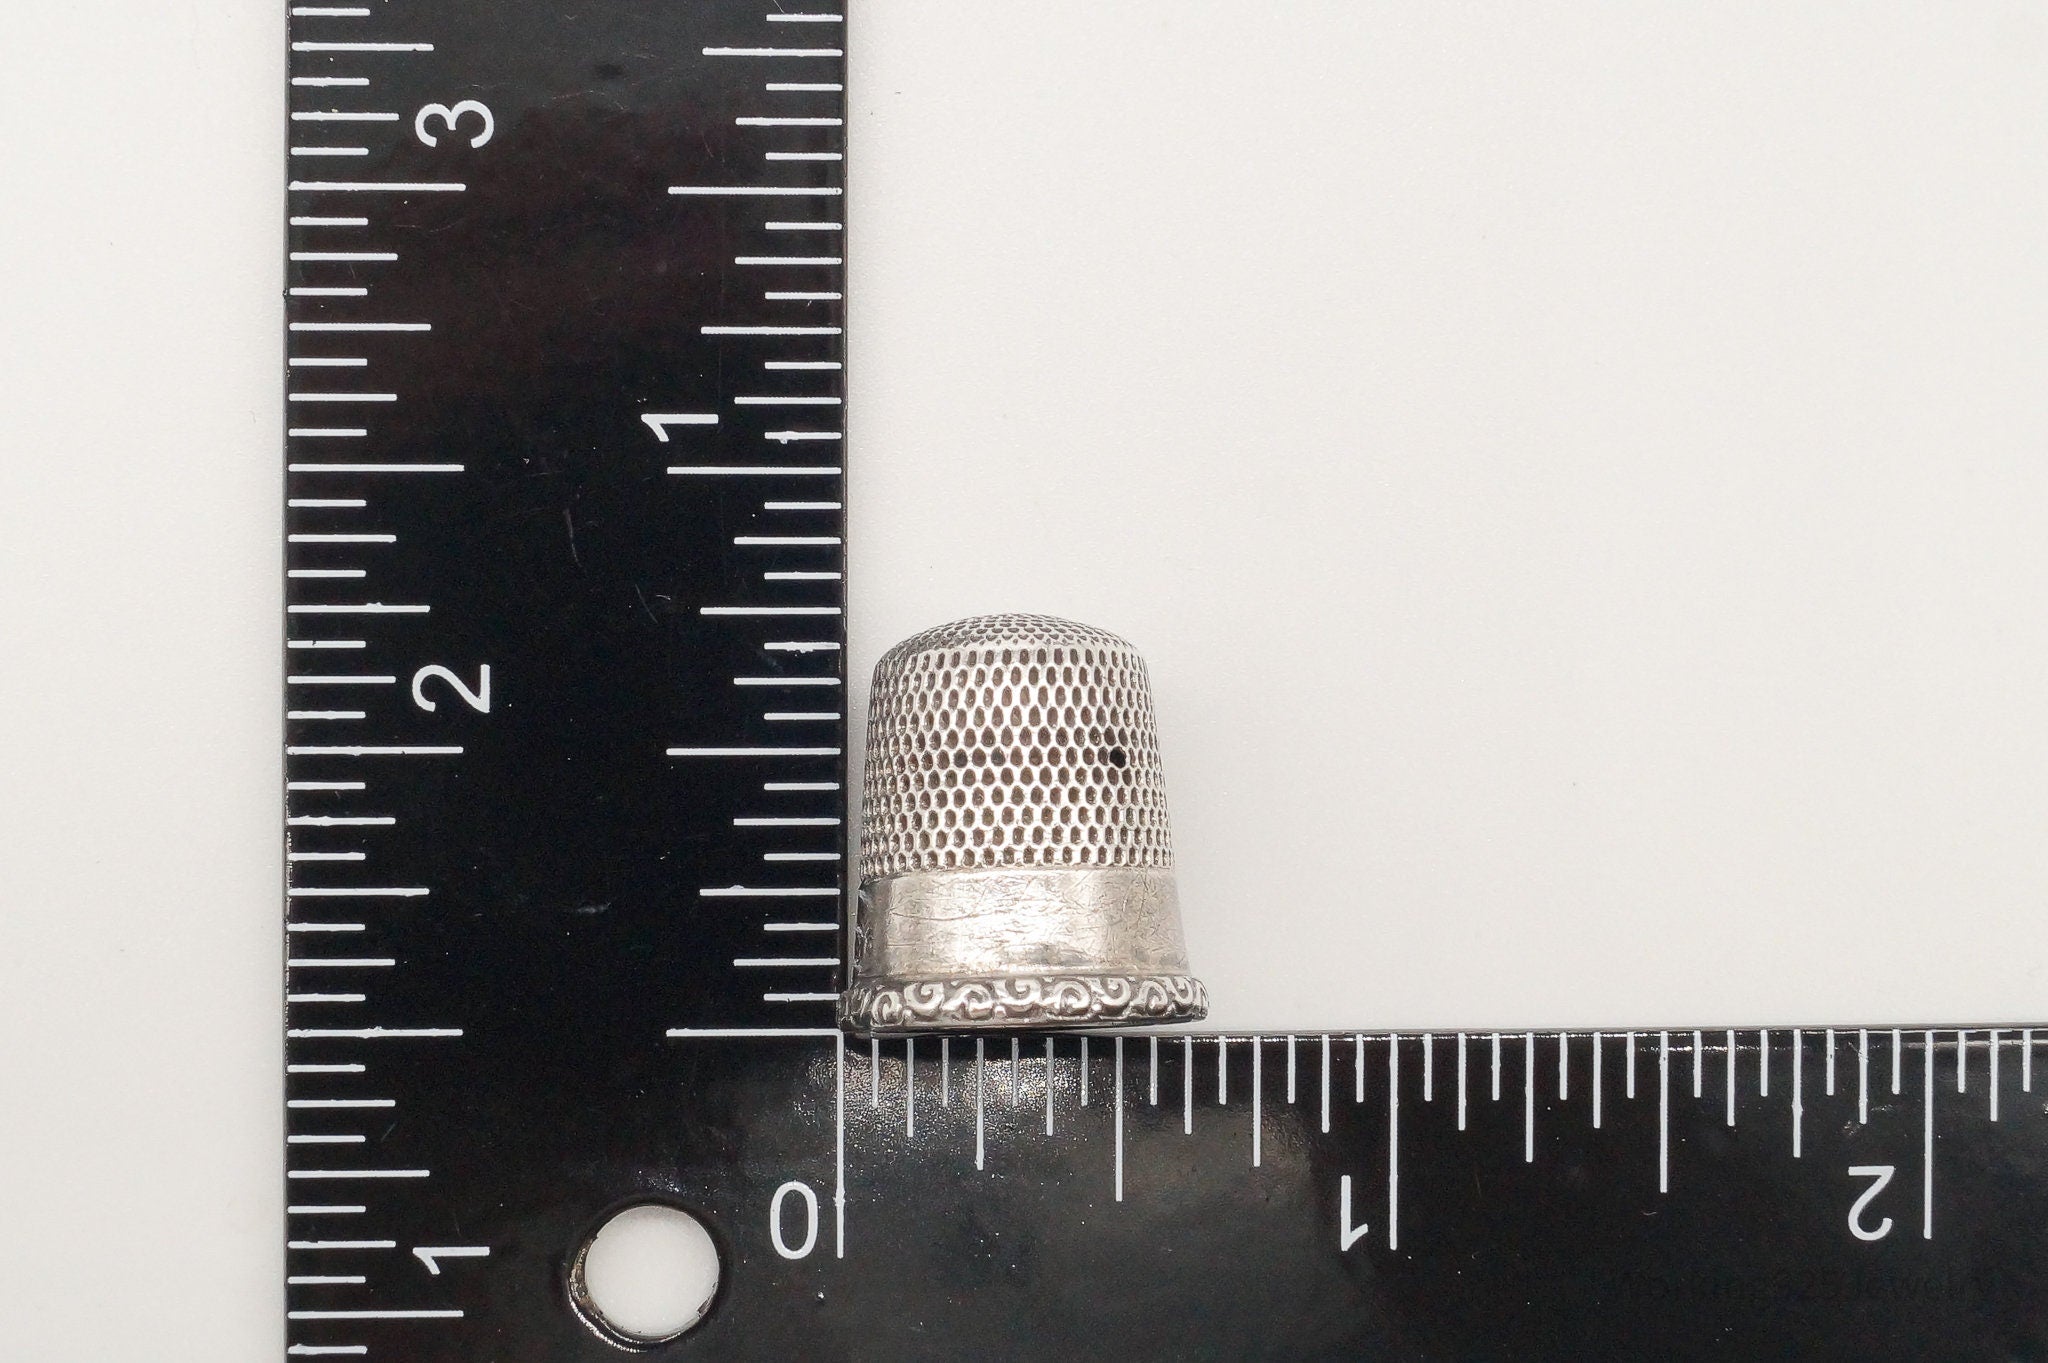 1800s Antique Simons Bros & Co Dome Sterling Silver Thimble Size 9